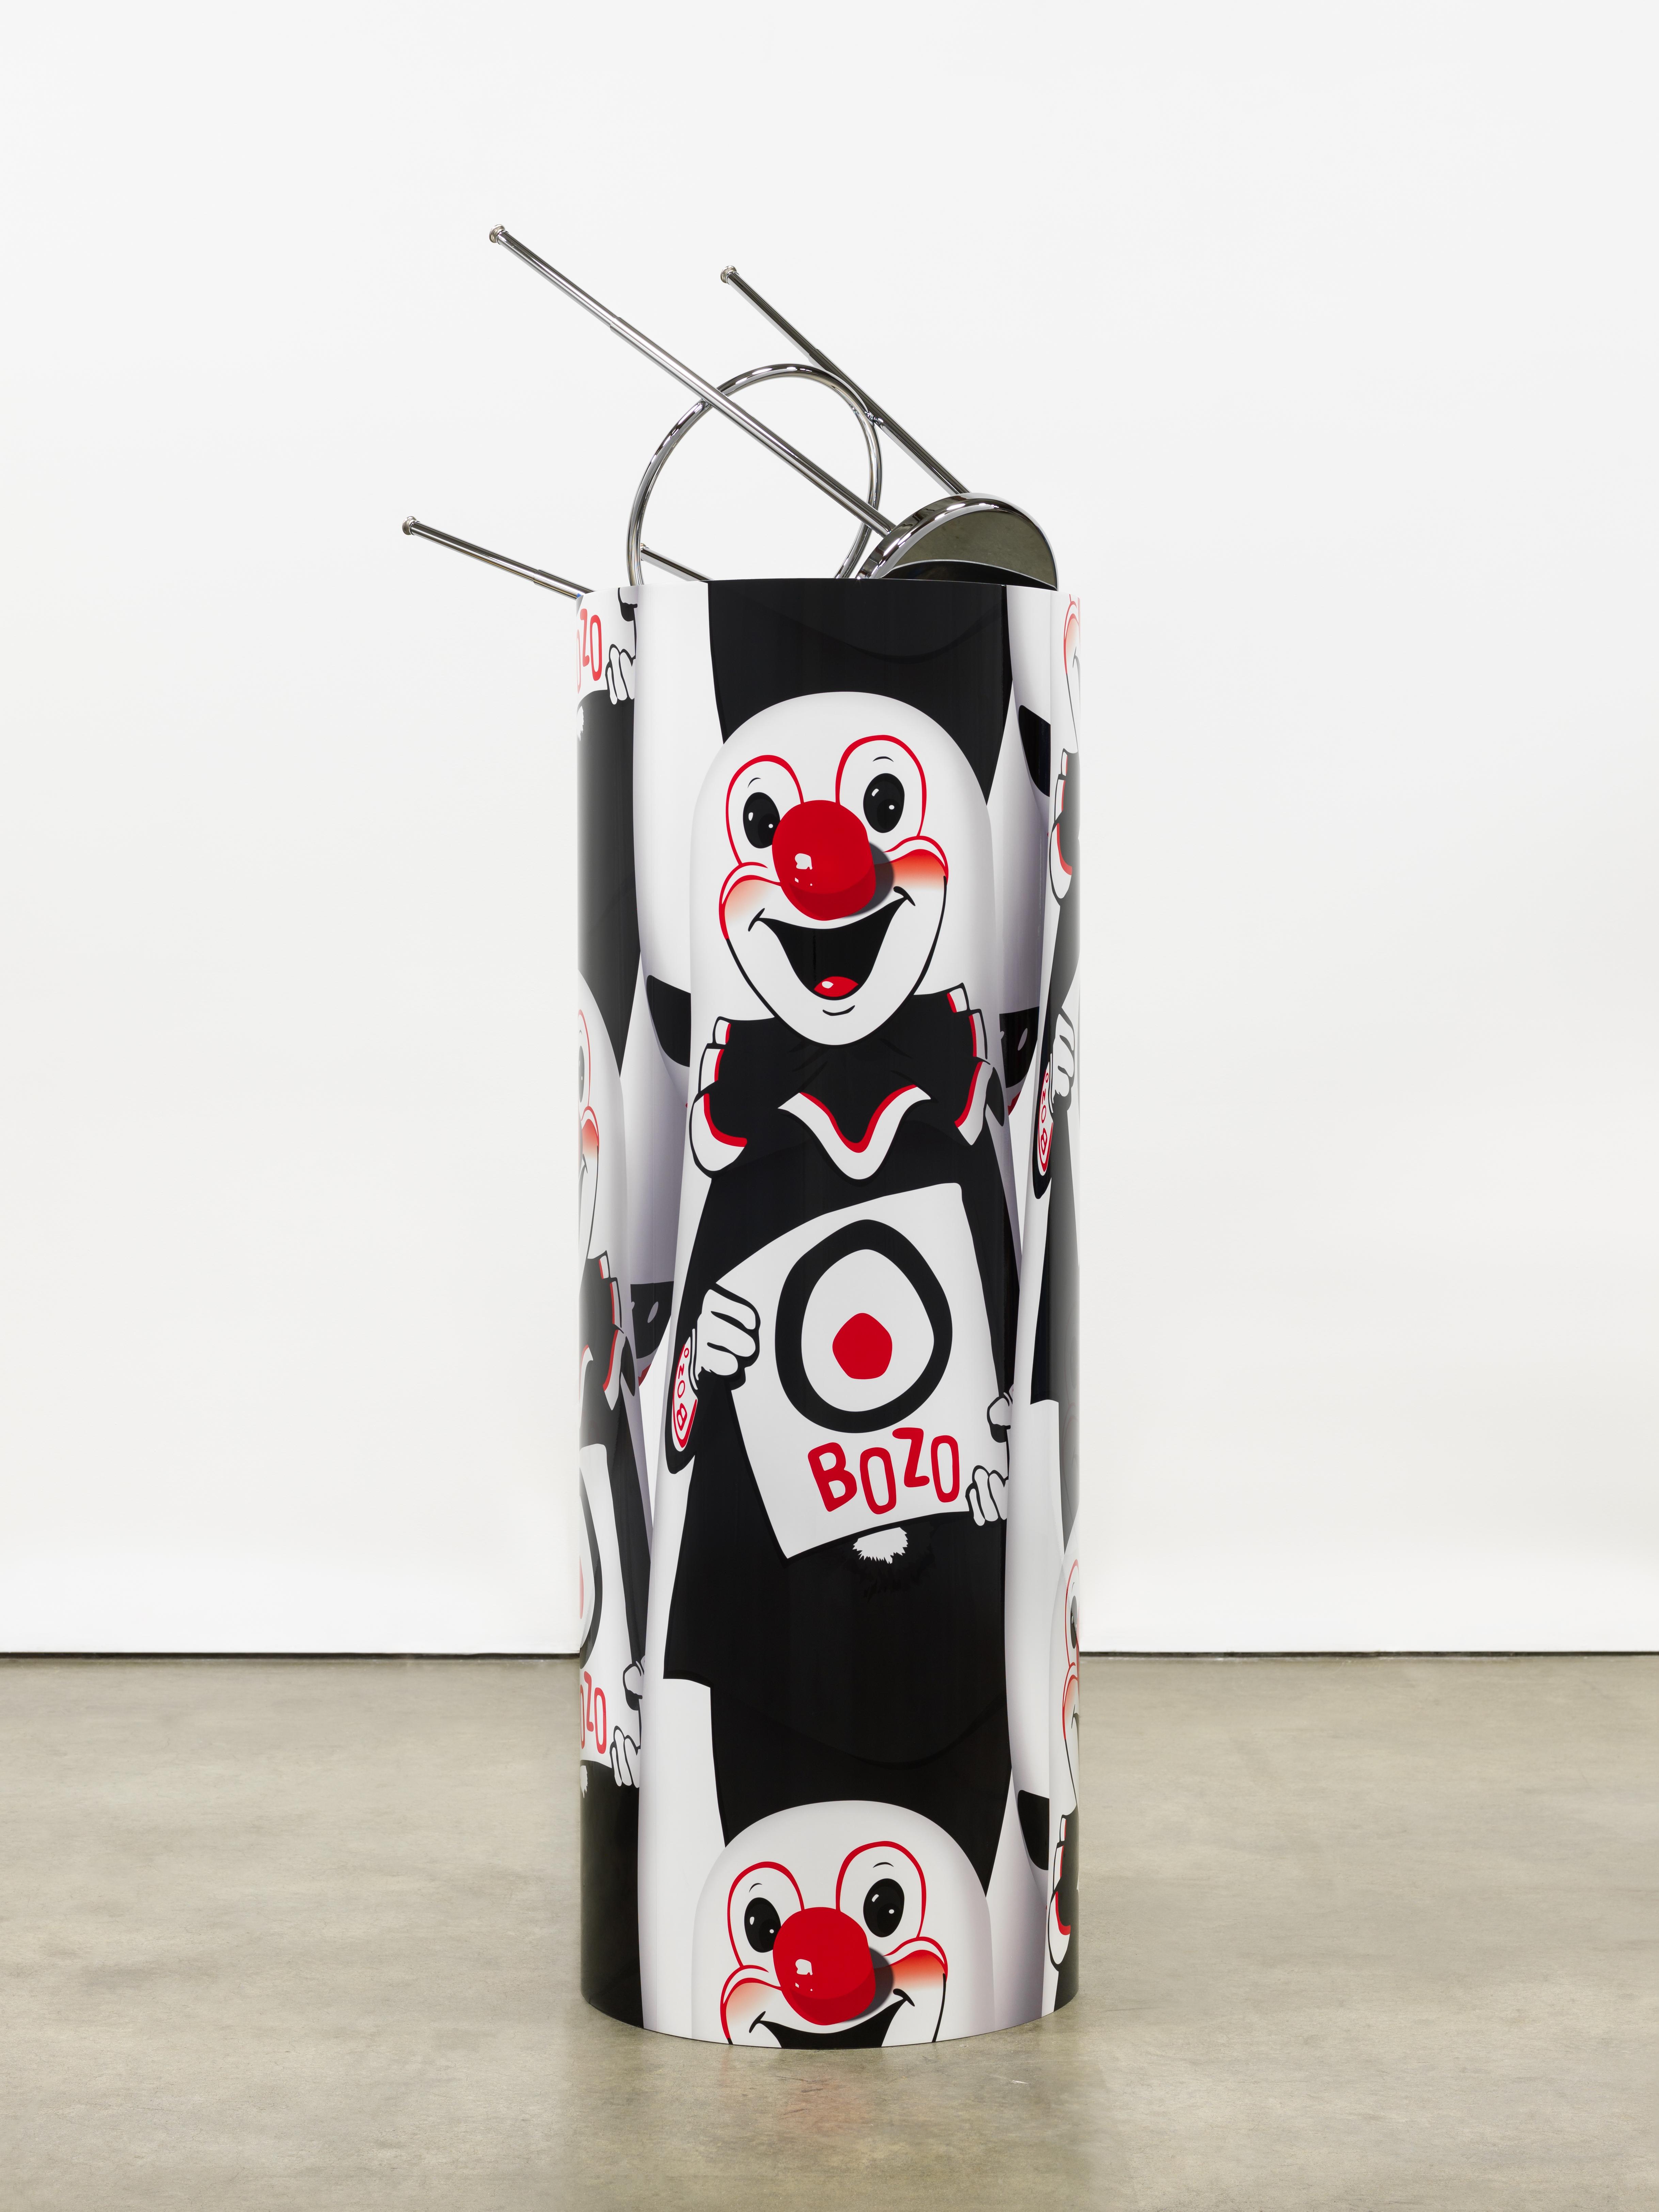 A cylinder is wrapped with the repeating image of a white, red, and black clown holding a target with "BOZO" written below. An upside-down stool protrudes from the top of the sculpture.